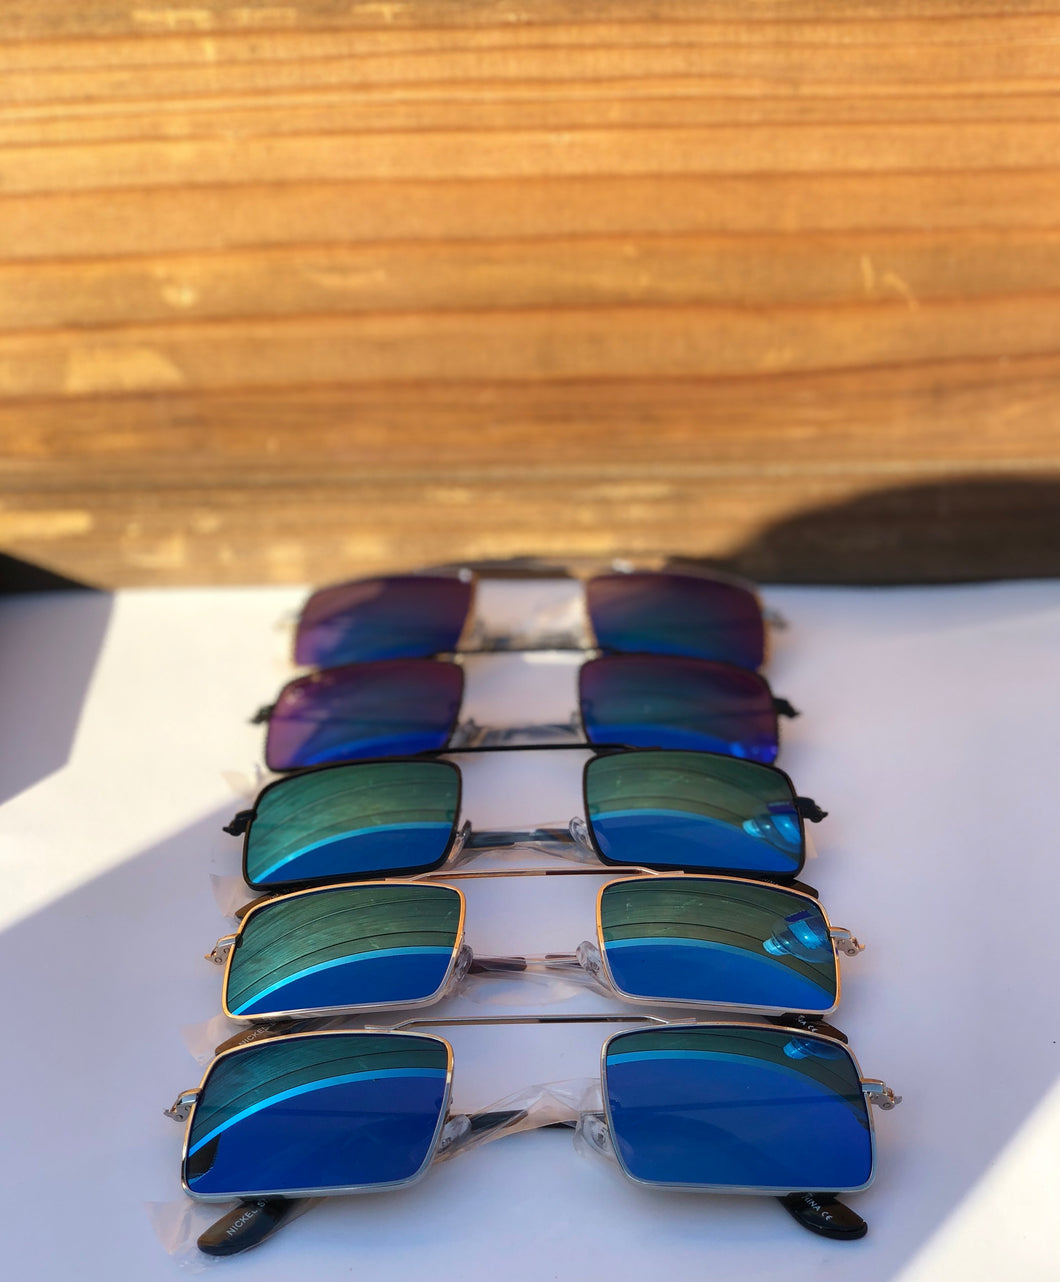 Hipster Vibes Reflection Sunglasses